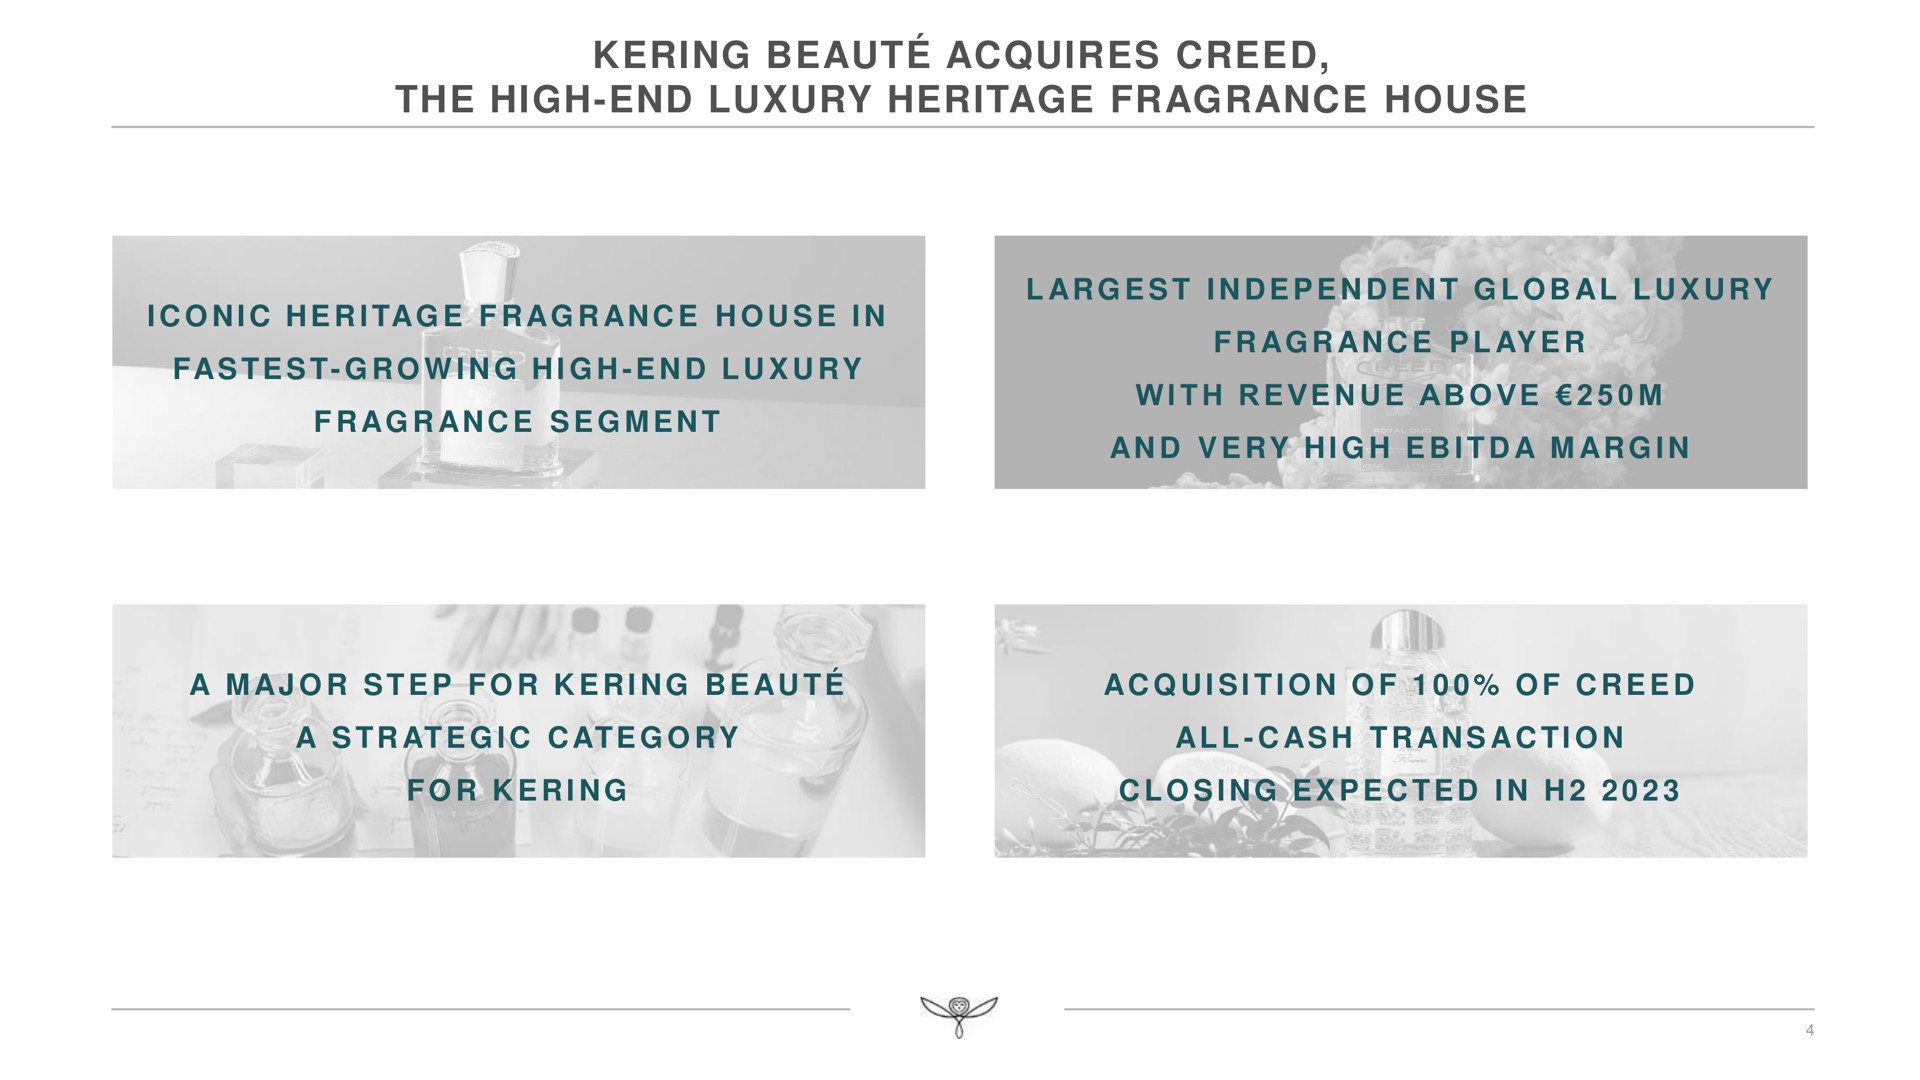 acquires creed the high end luxury heritage fragrance house a a major keg teg ory aute be acquisition of of all cash transaction in | Kering